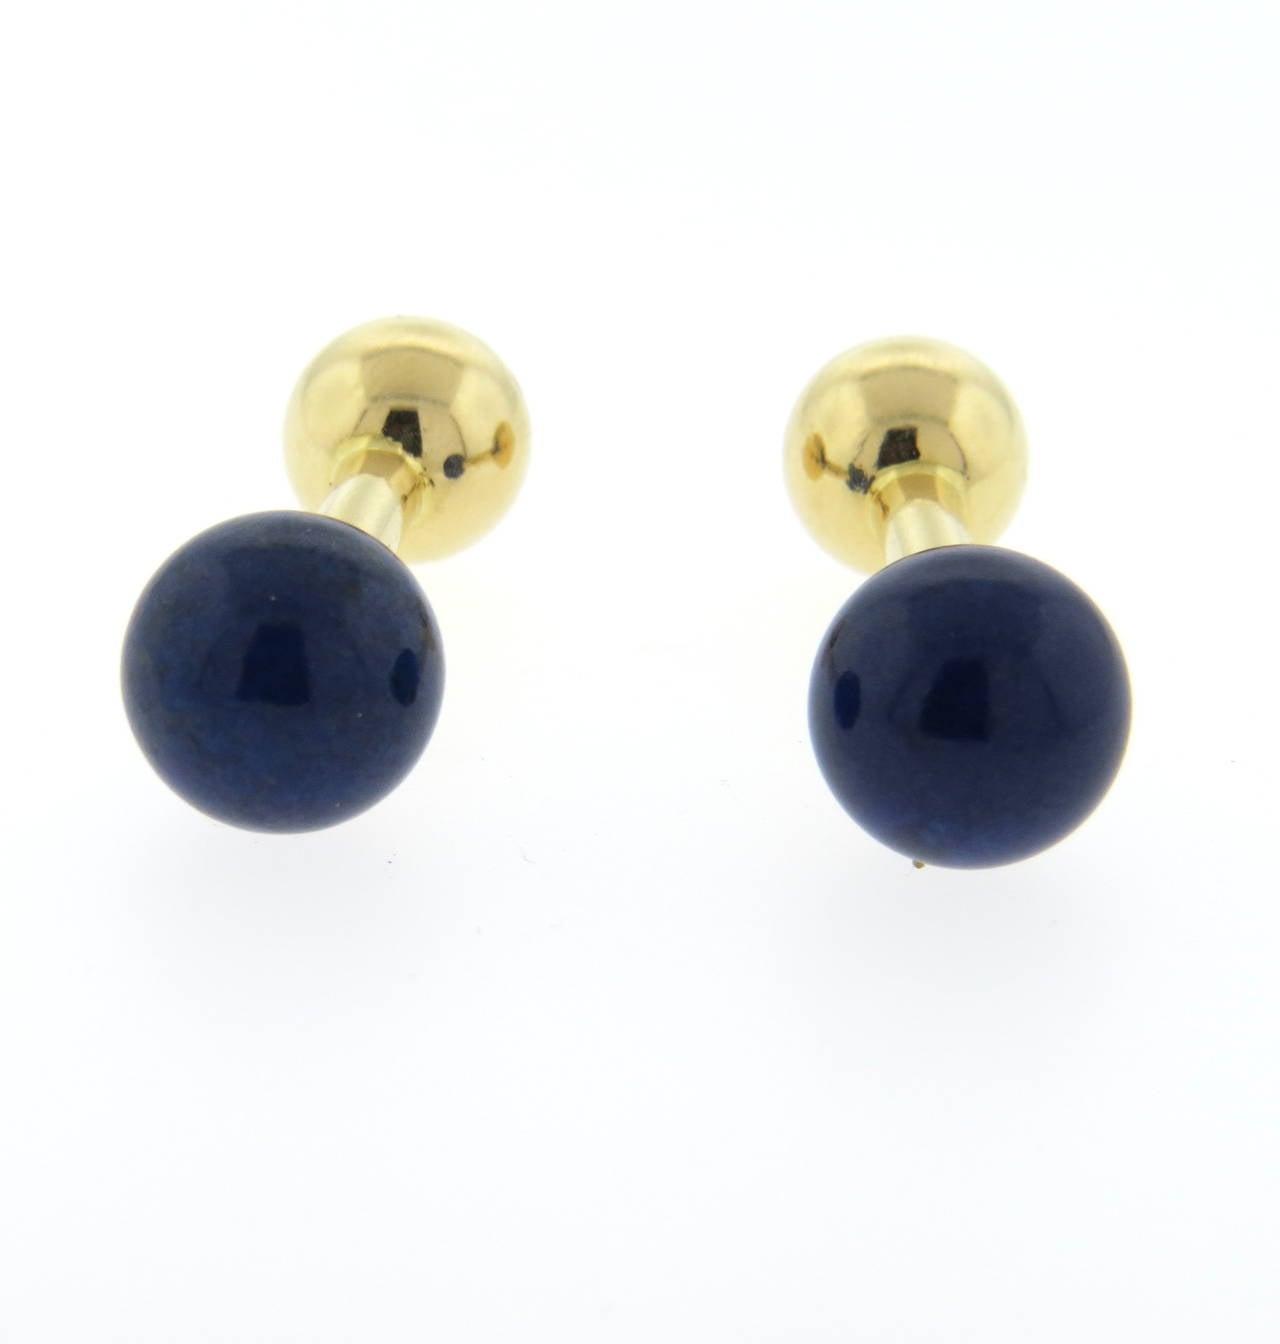 A pair of 14k yellow gold cufflinks set with lapis.  Crafted by Tiffany & Co, the cufflinks measure 11.2mm in diameter (lapis) and 9.3mm in diameter (rear off cufflinks).  They weigh 8.0 grams.  Marked: Tiffany & Co 585